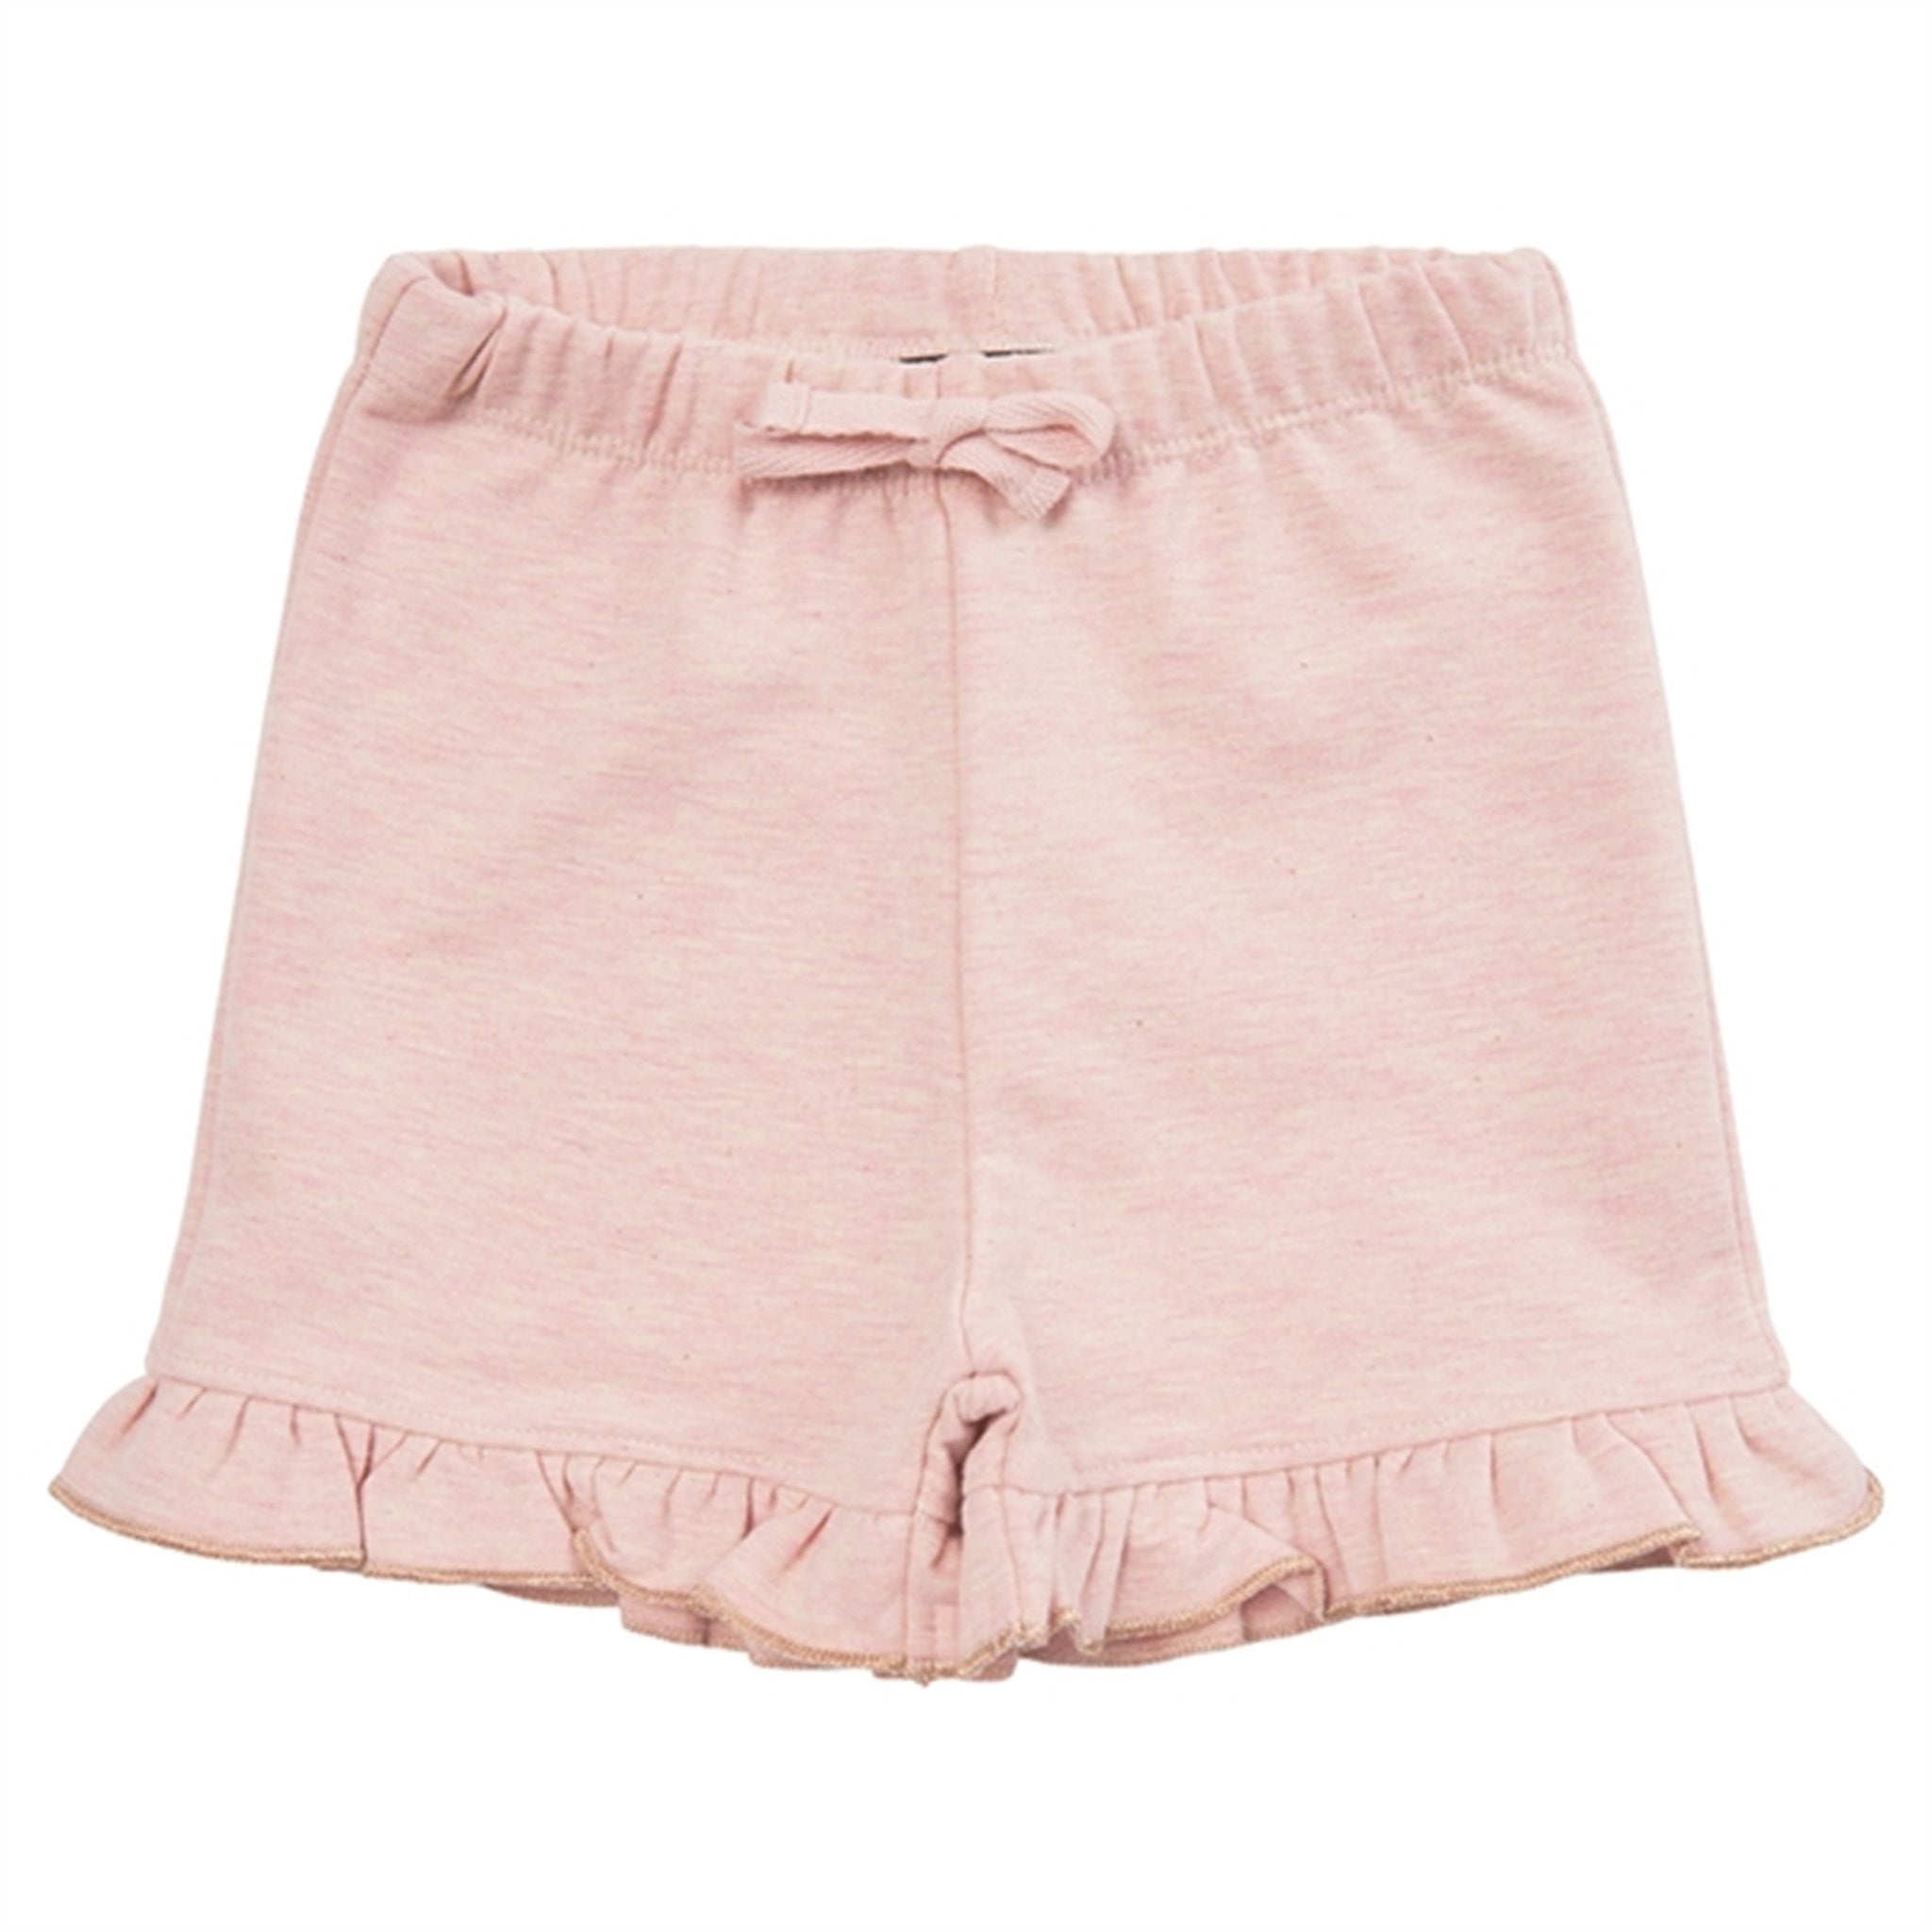 Petit by Sofie Schnoor Rose Blush Shorts 5